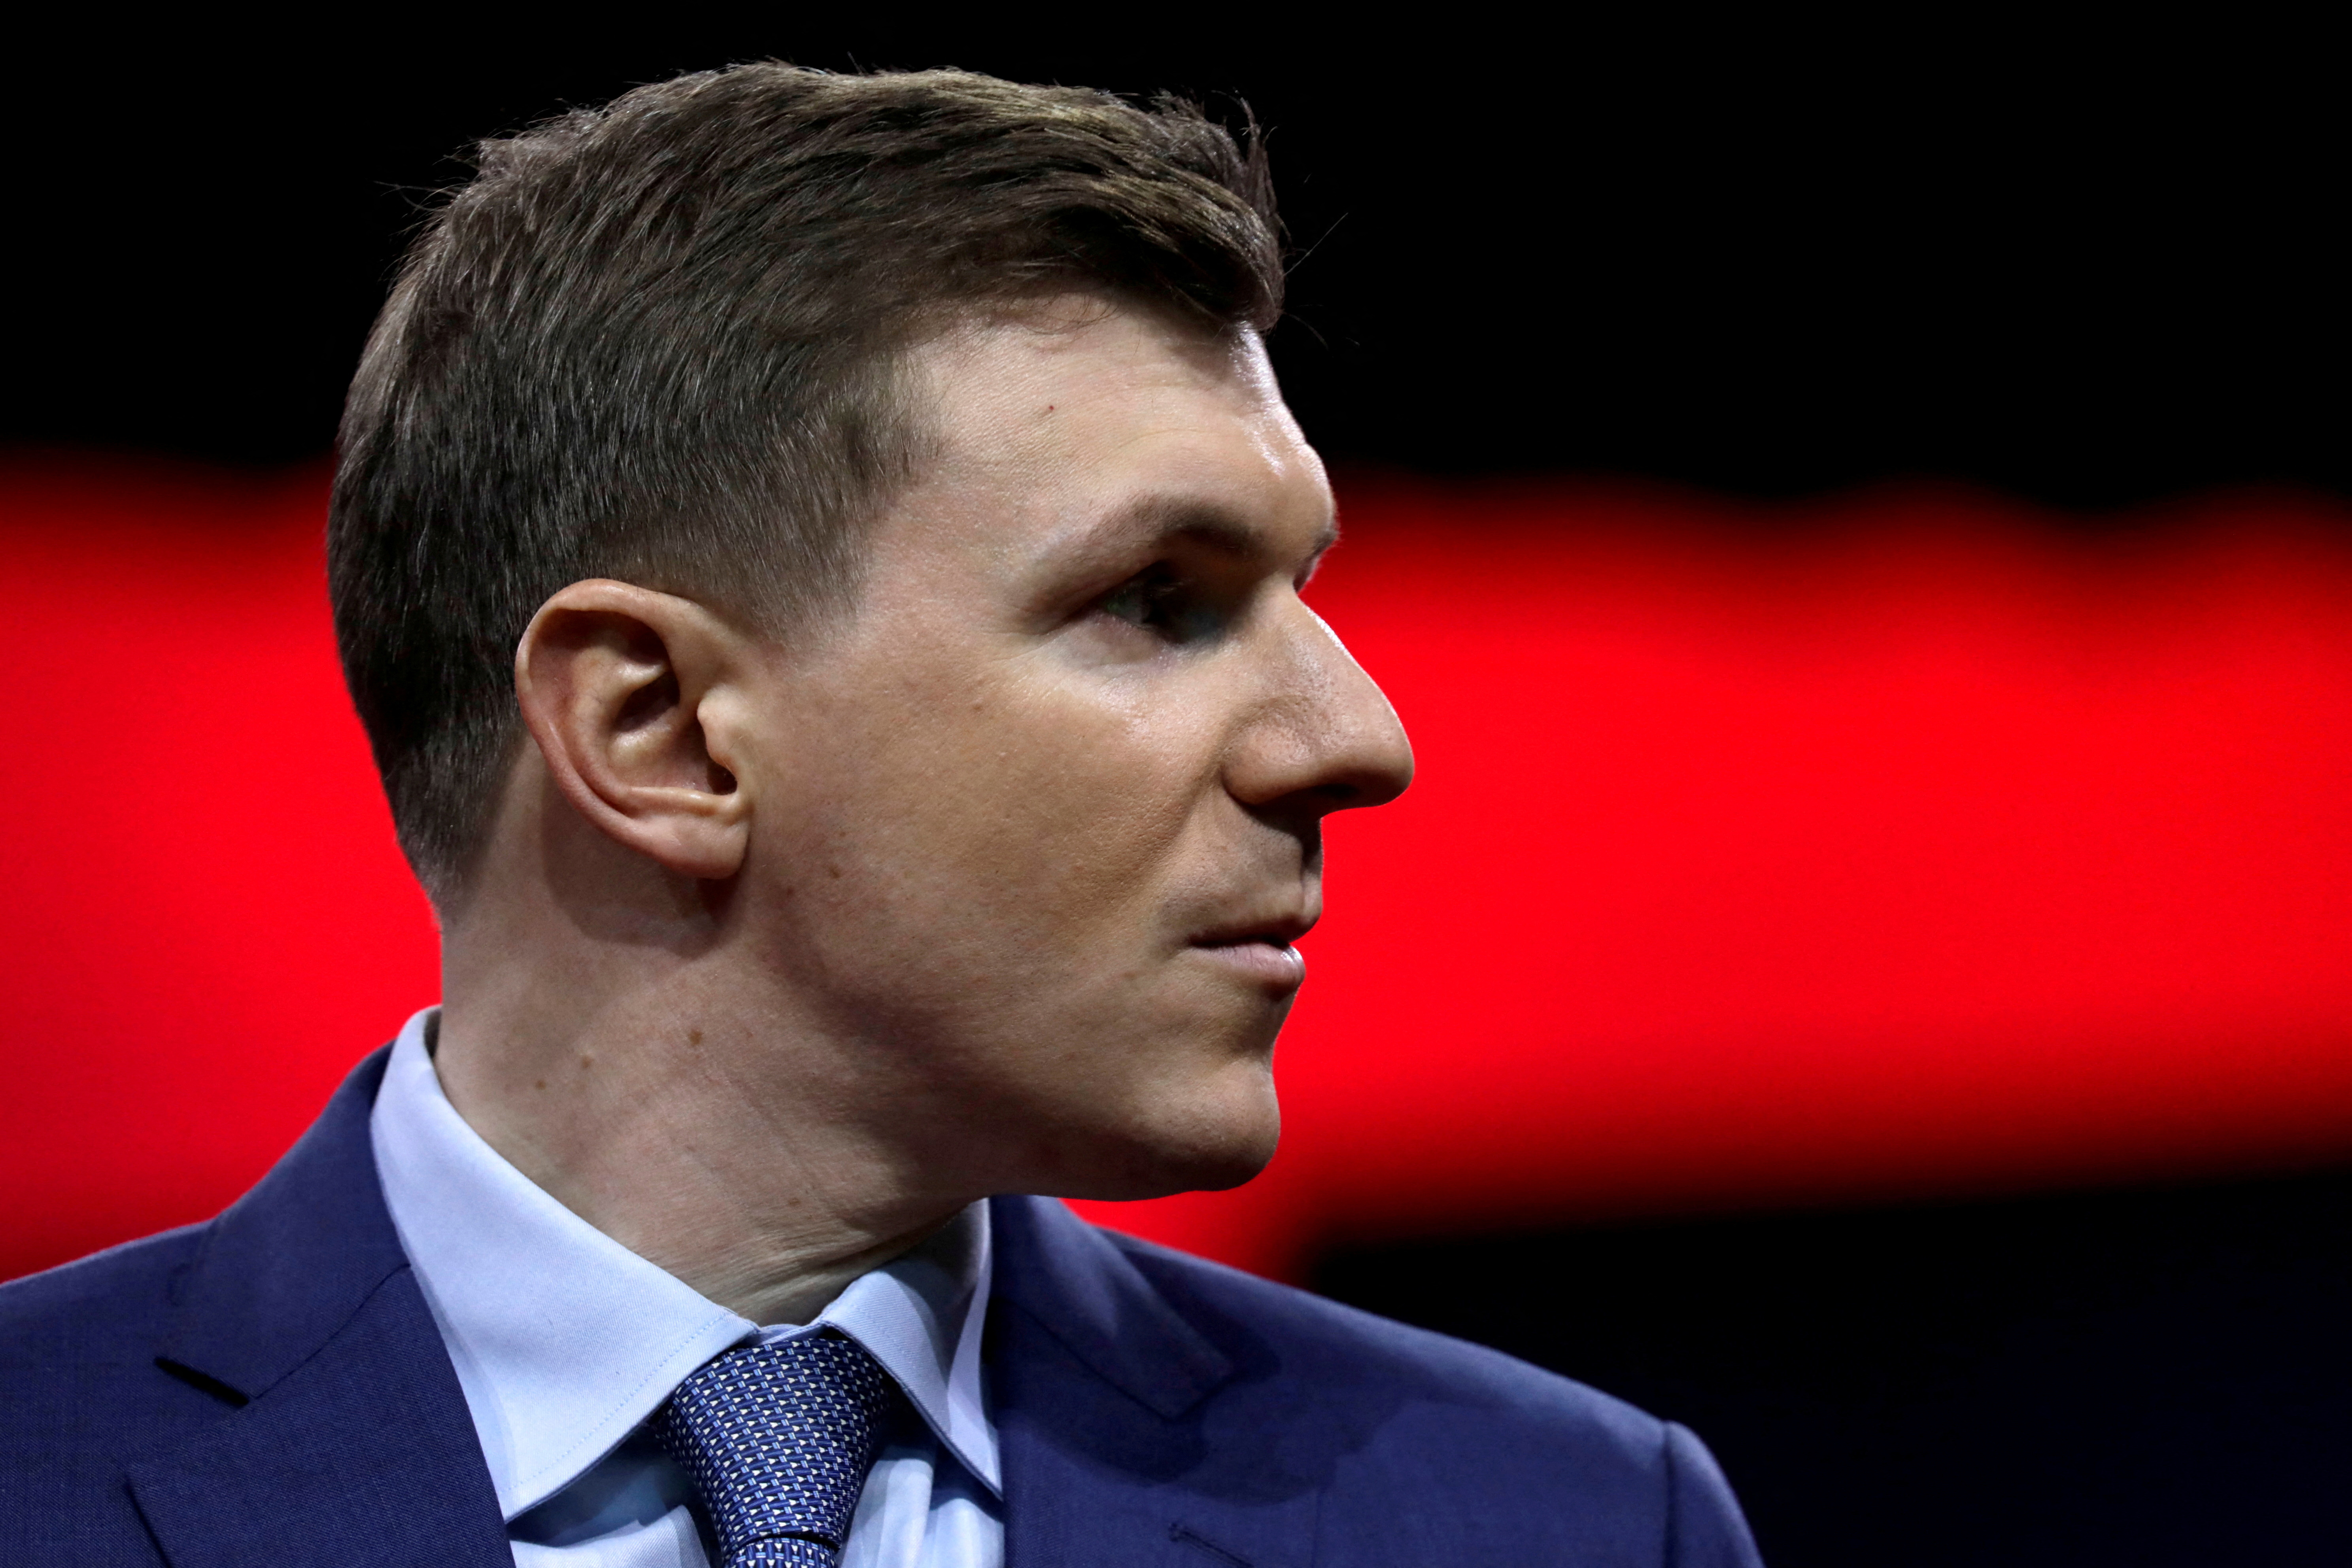 FILE PHOTO: Political activist James O'Keefe speaks at CPAC in Washington